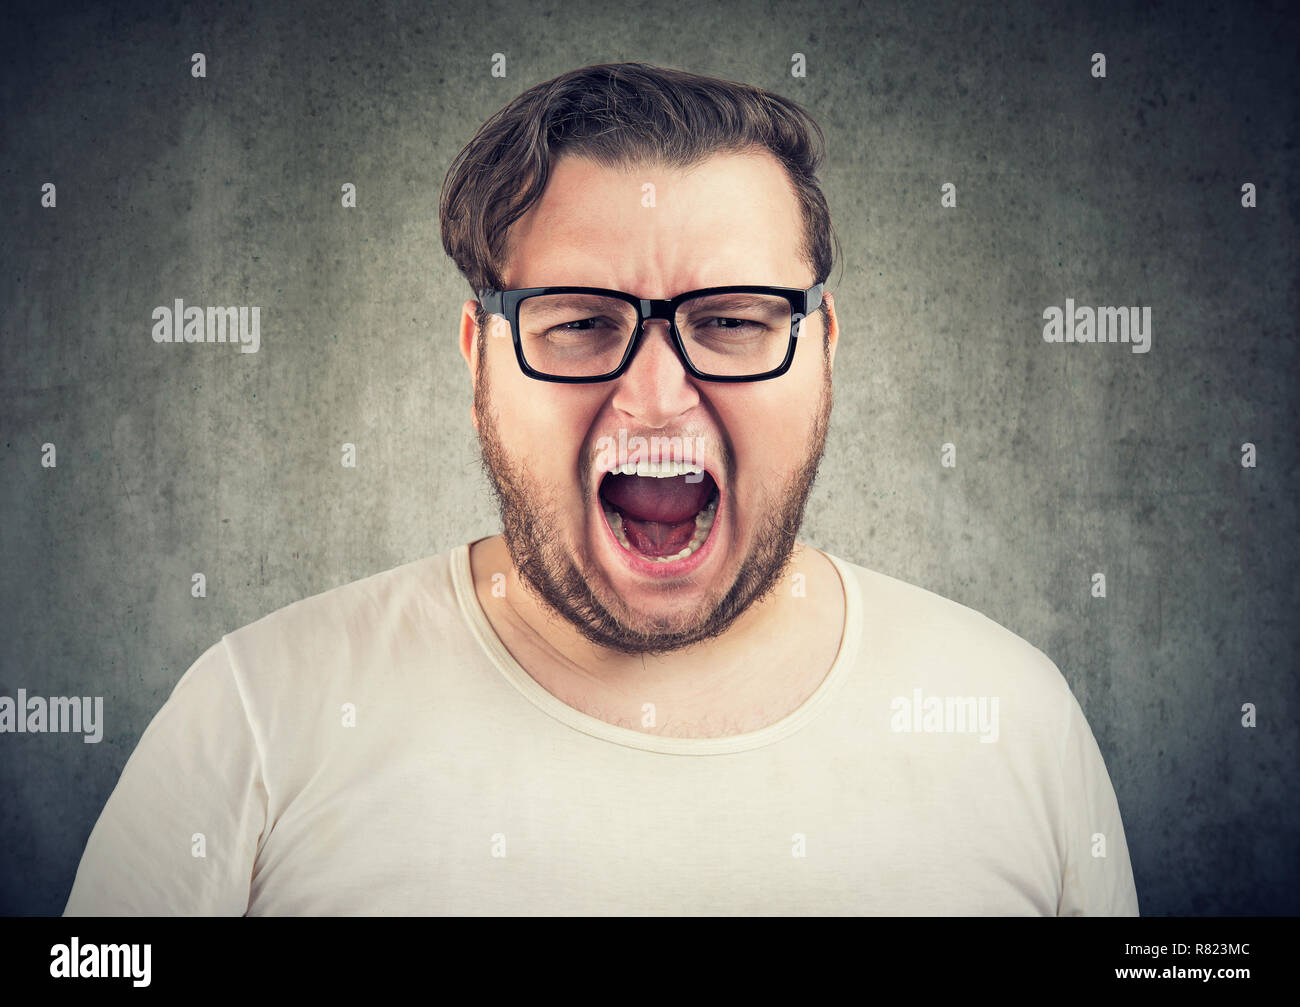 Young casual chubby man in glasses yelling at camera in anger on gray background Stock Photo